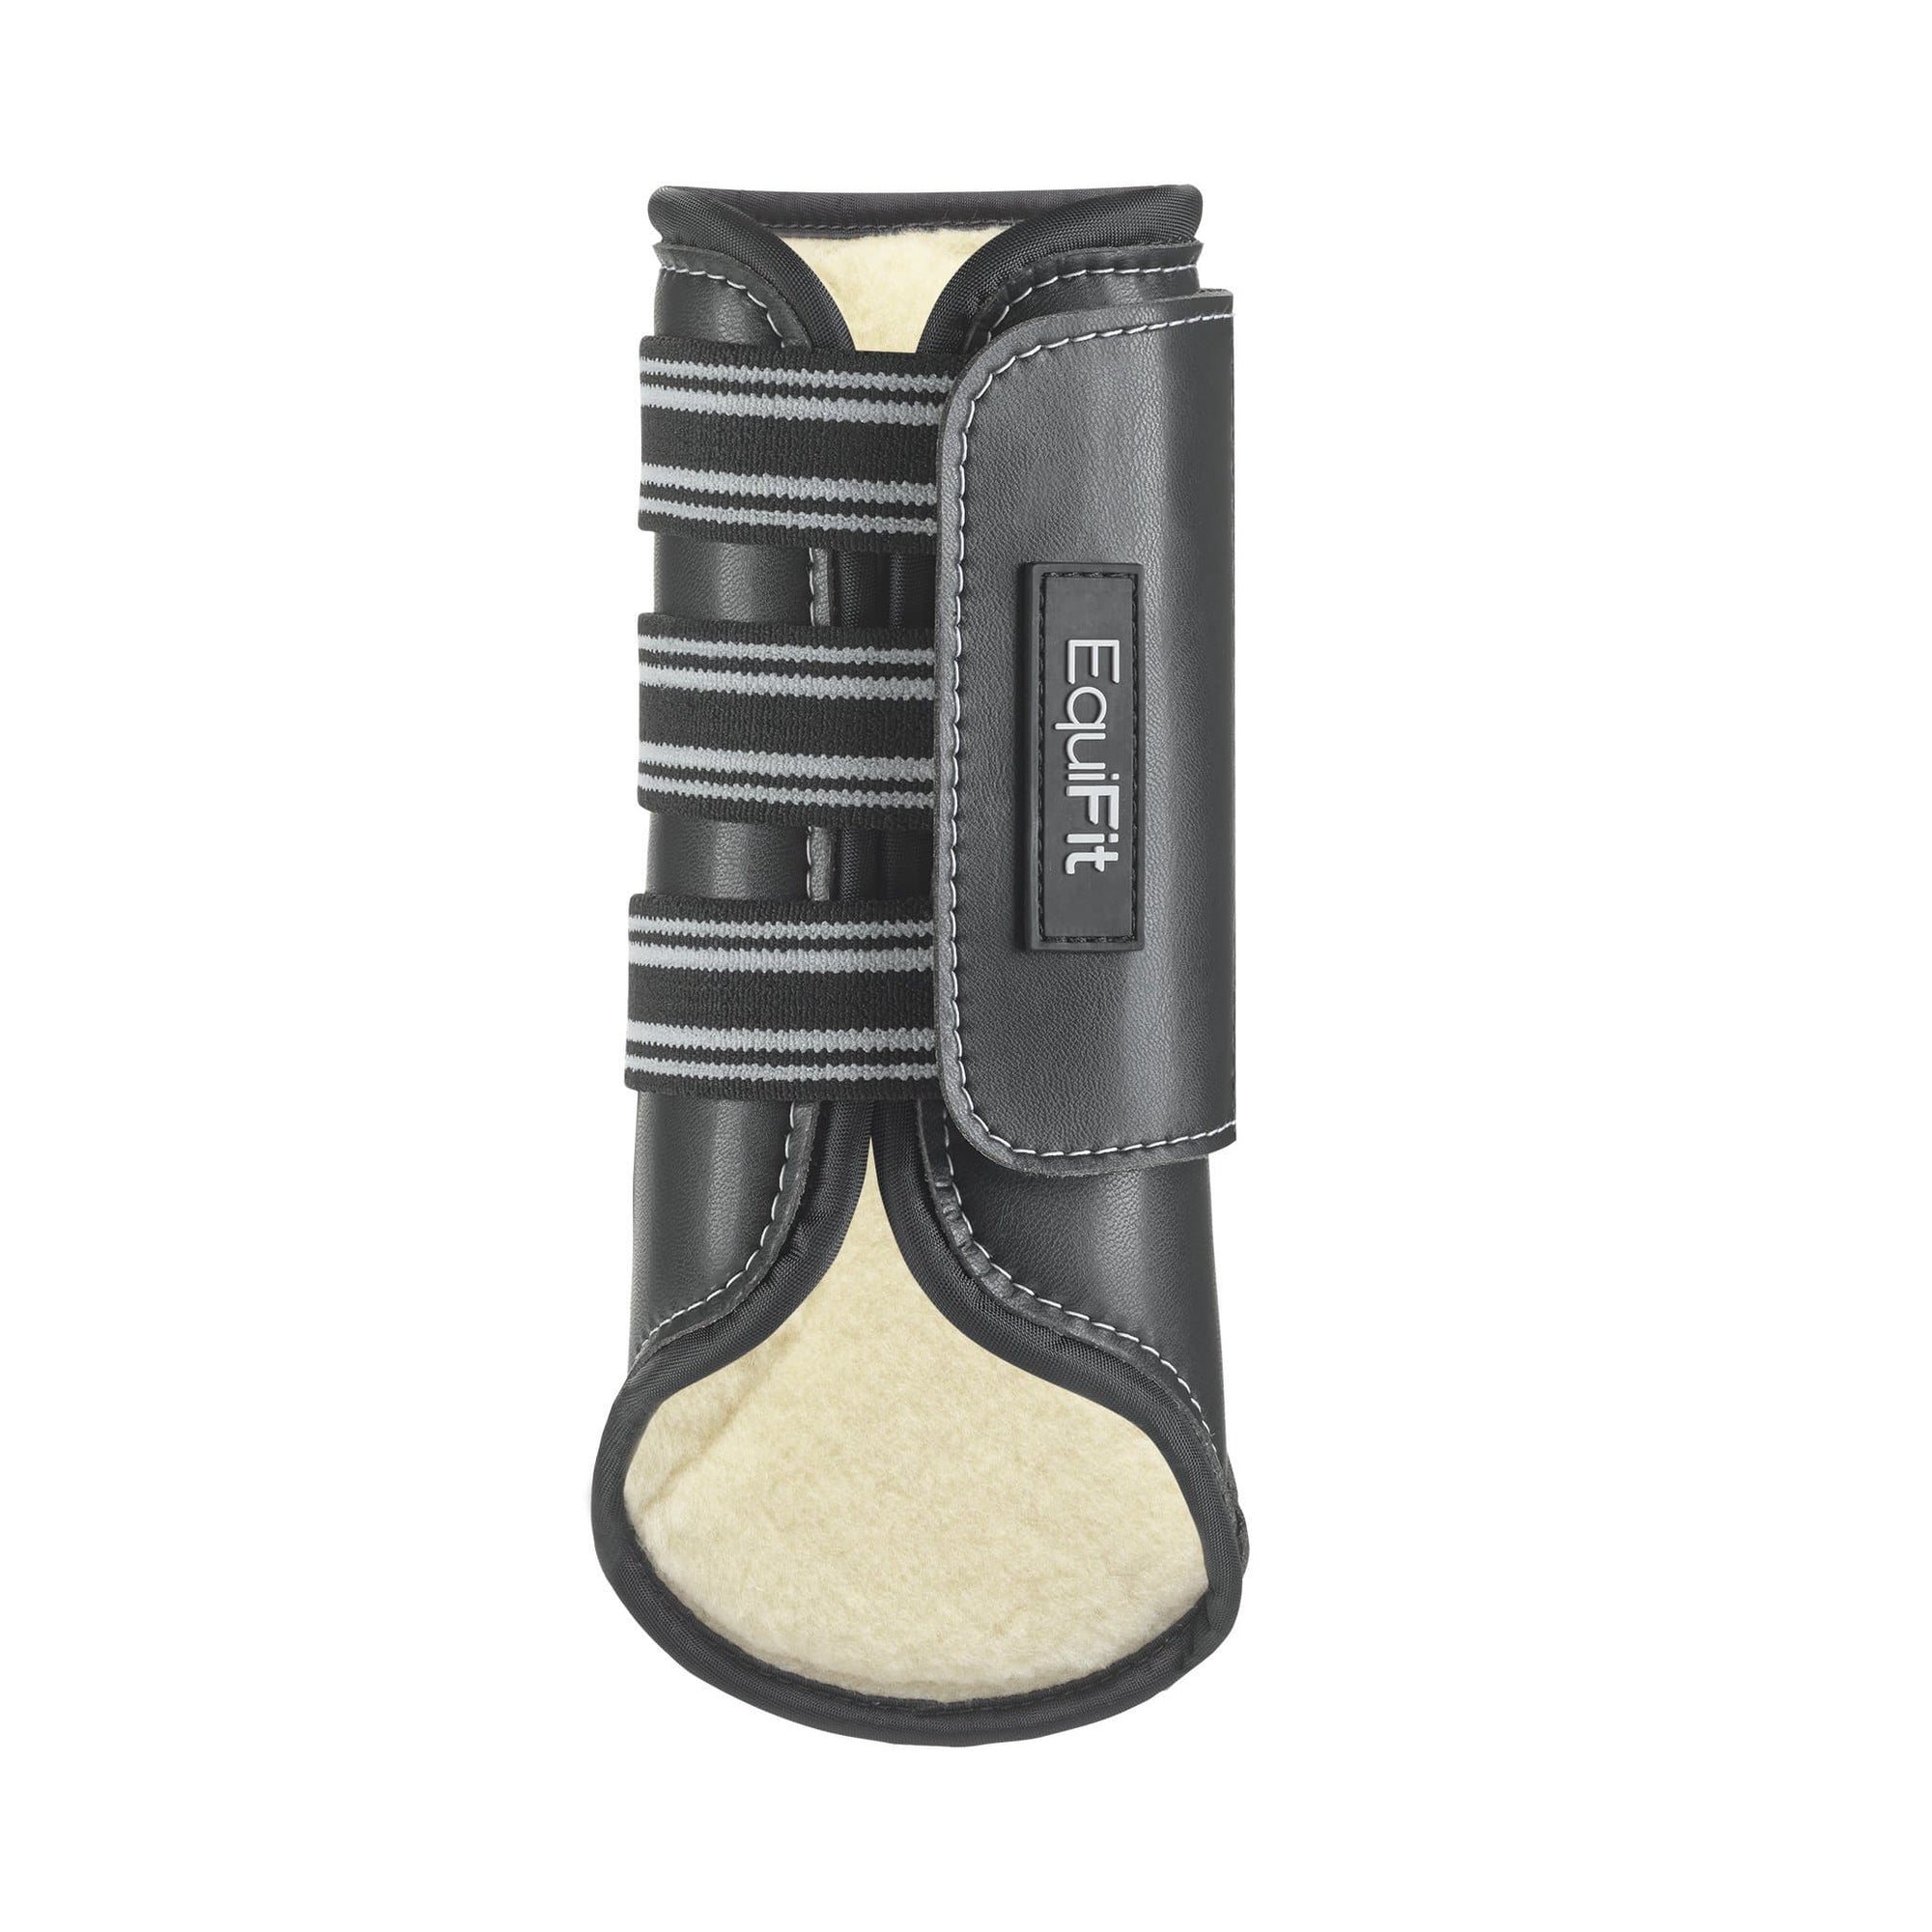 MultiTeq Front Boot with SheepsWool ImpacTeq Liner offers Full Coverage Protection, perfect for daily turnout and exercise